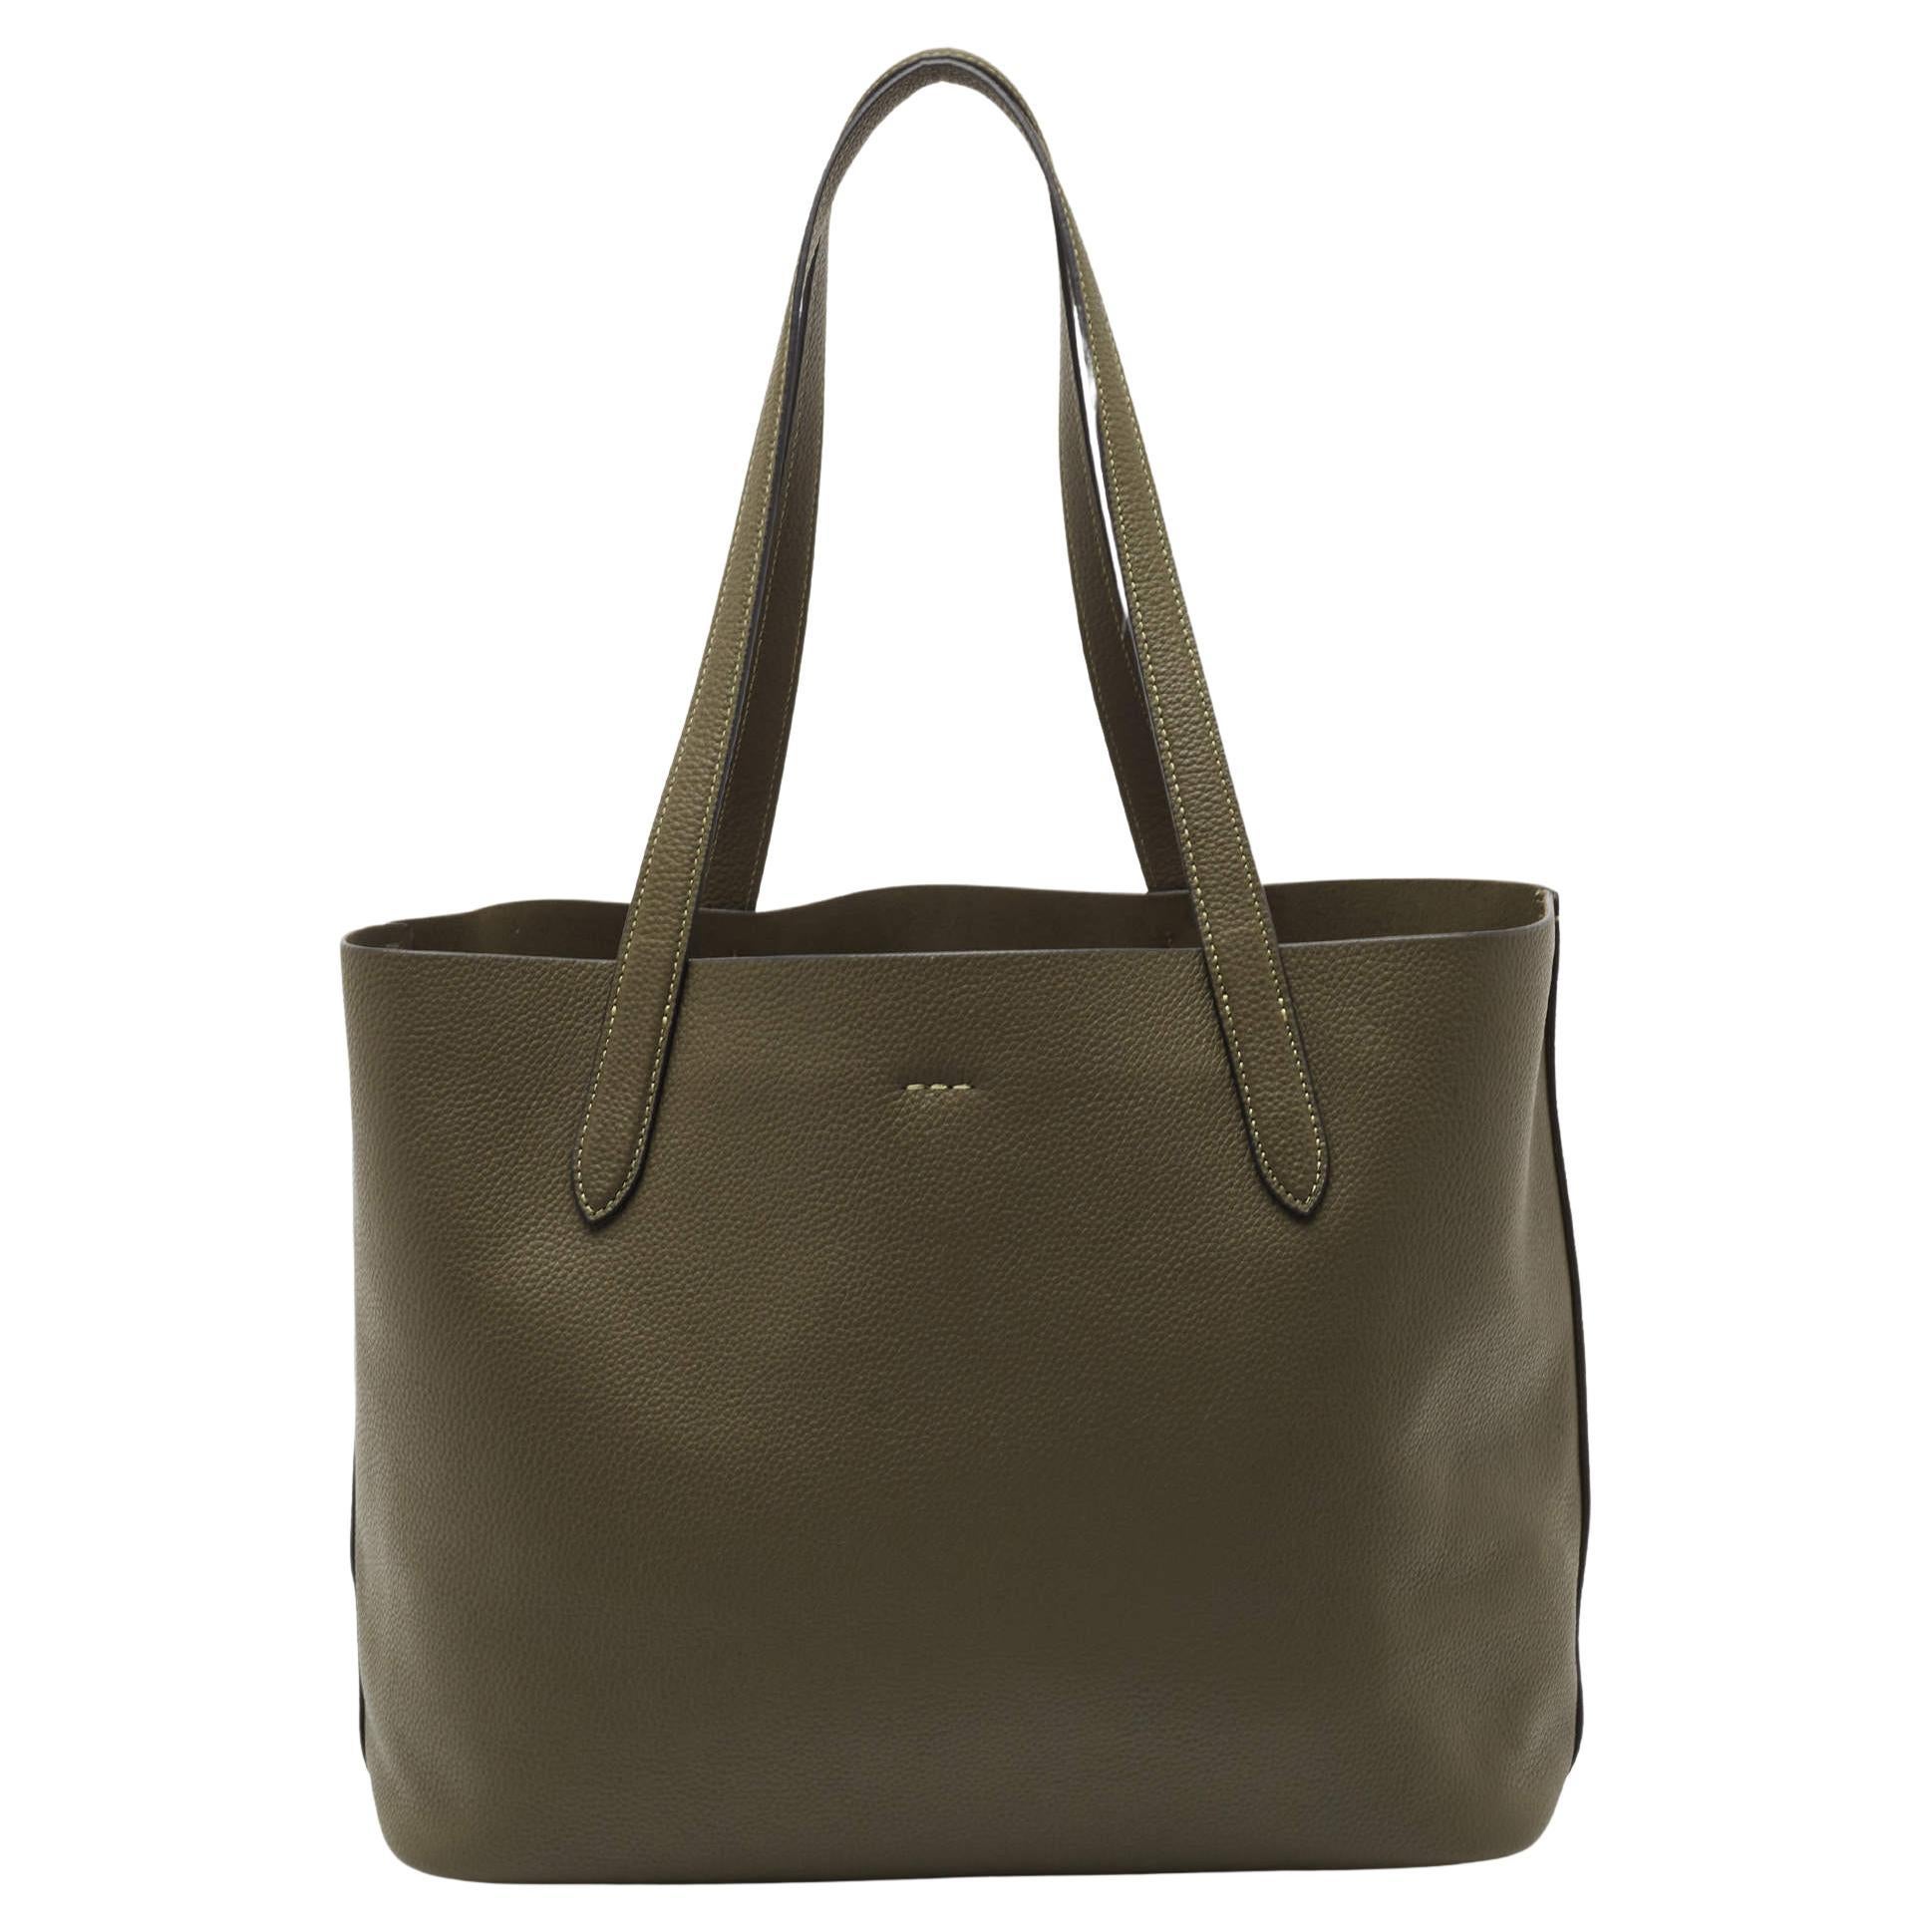 Coach Green Leather Cameron Tote Bag